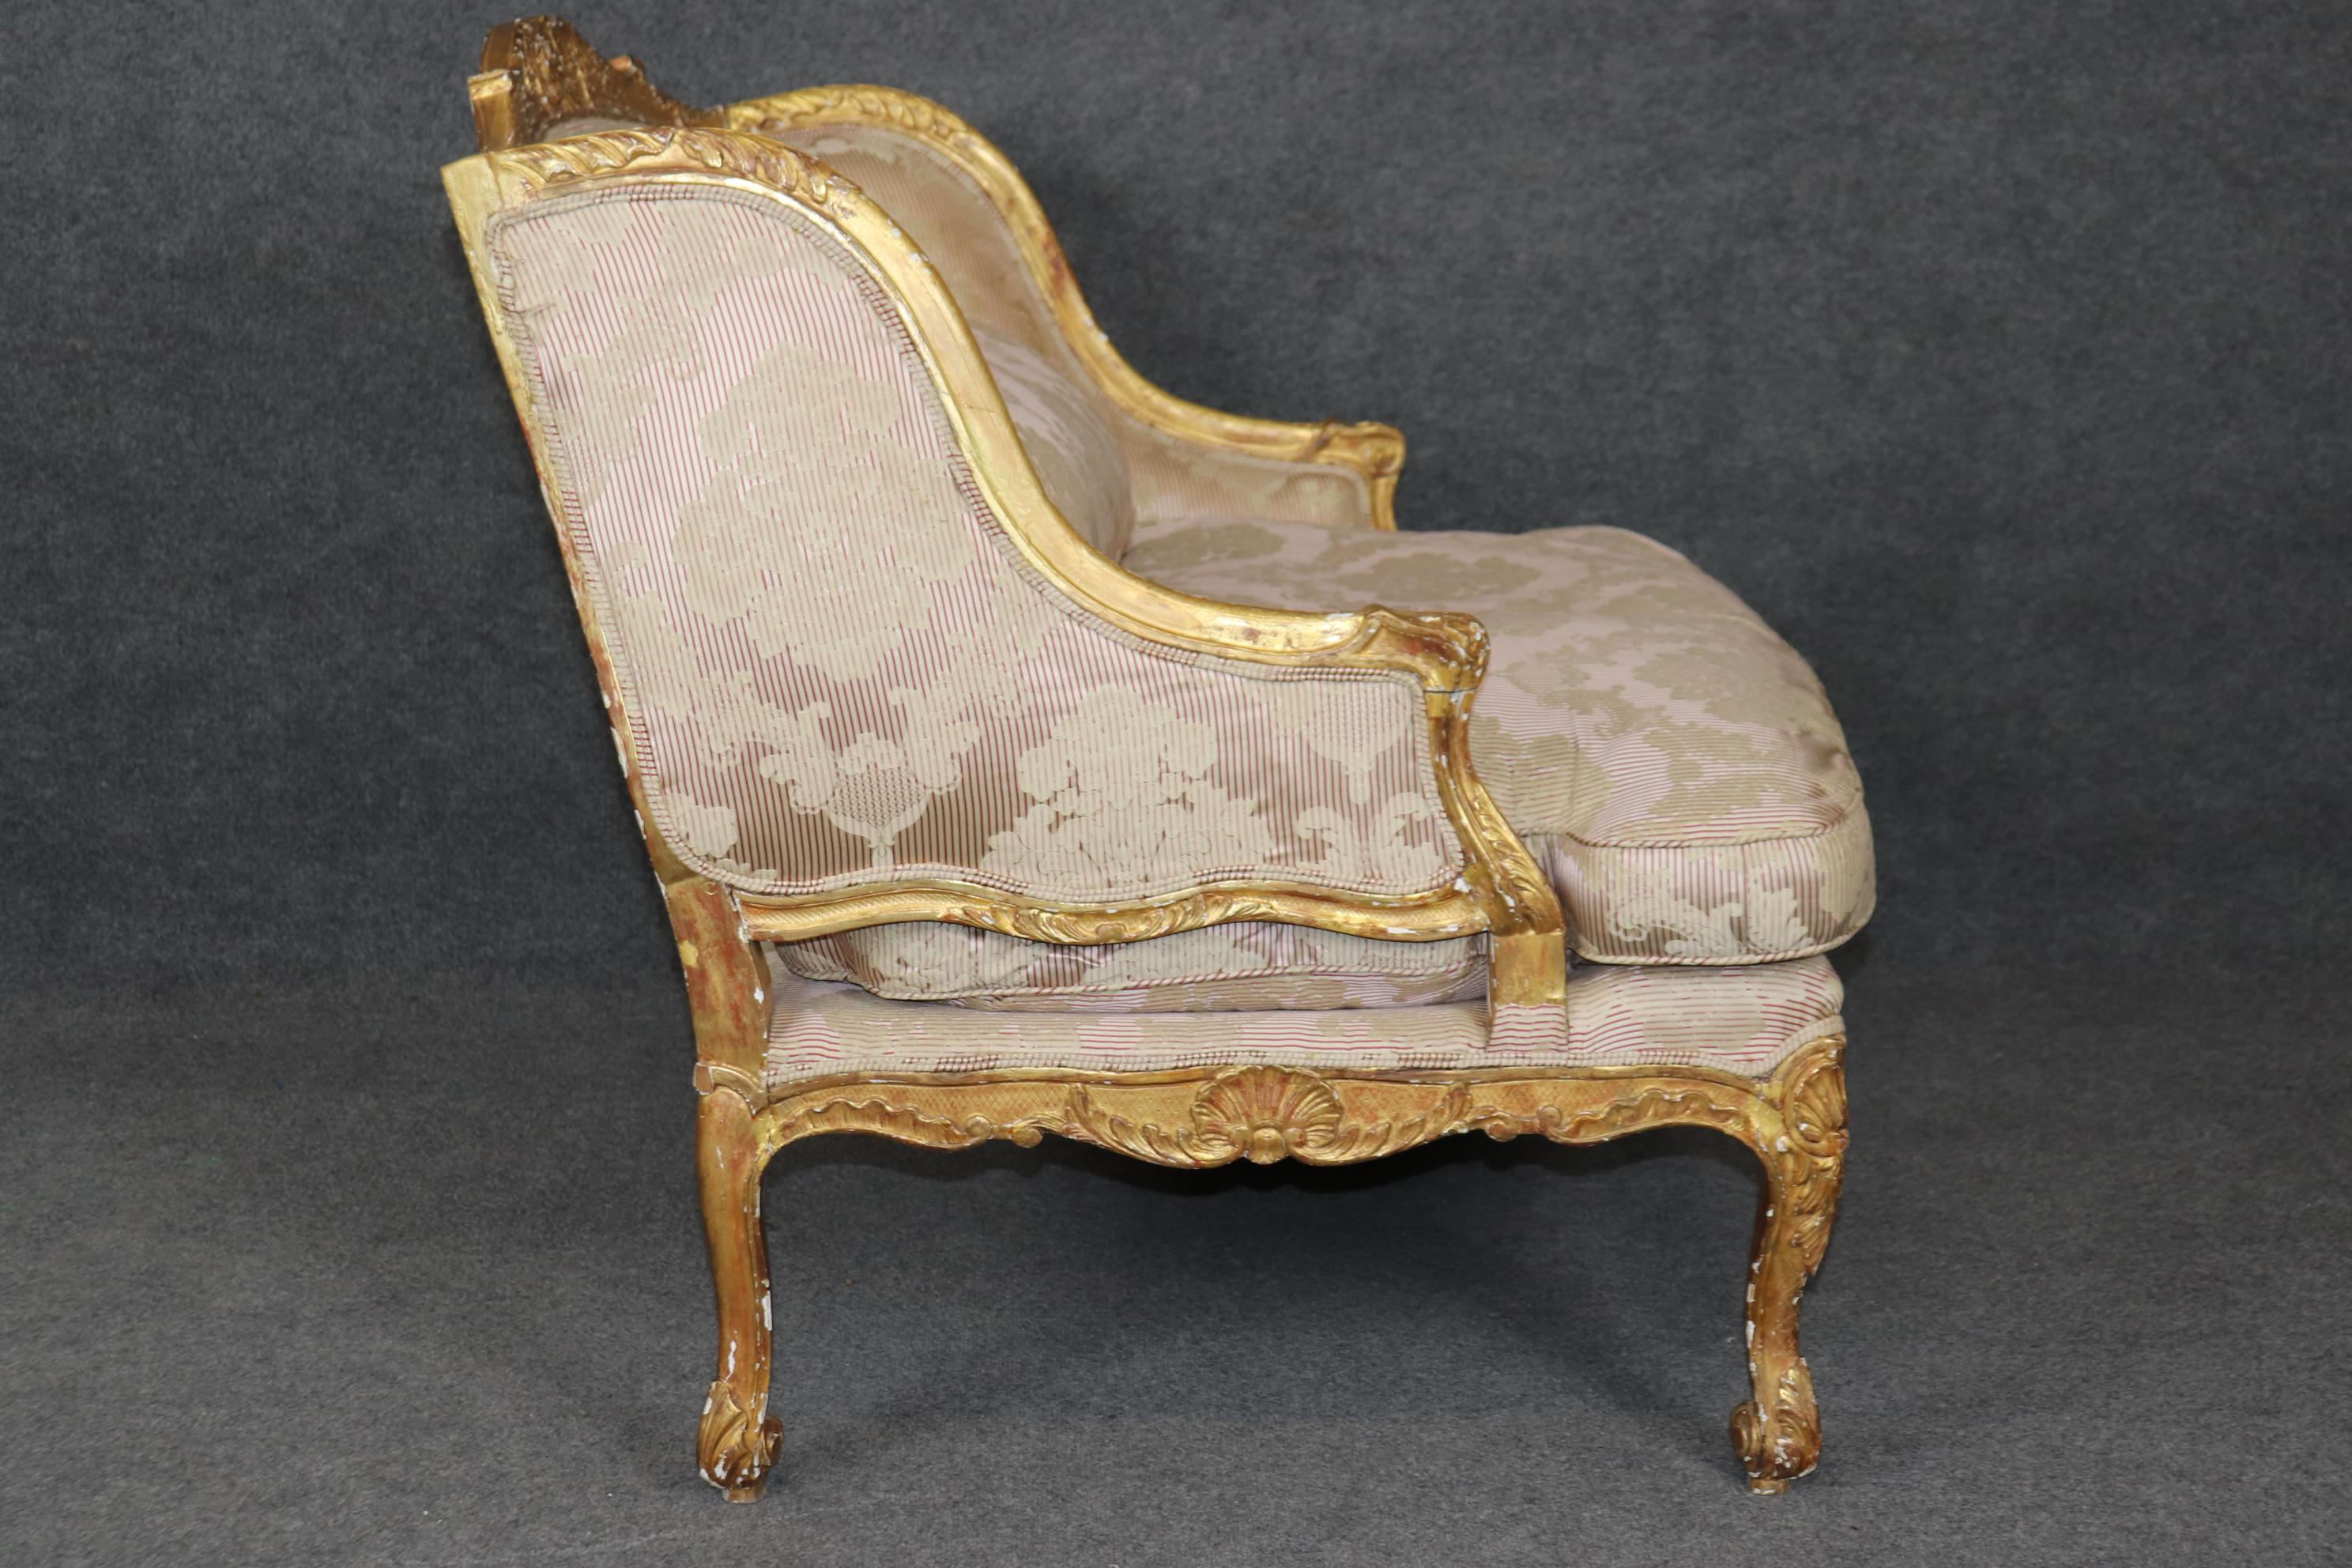 Superb 19th century French Gilded Louis XV Style Marquis Bergere Chair  For Sale 1